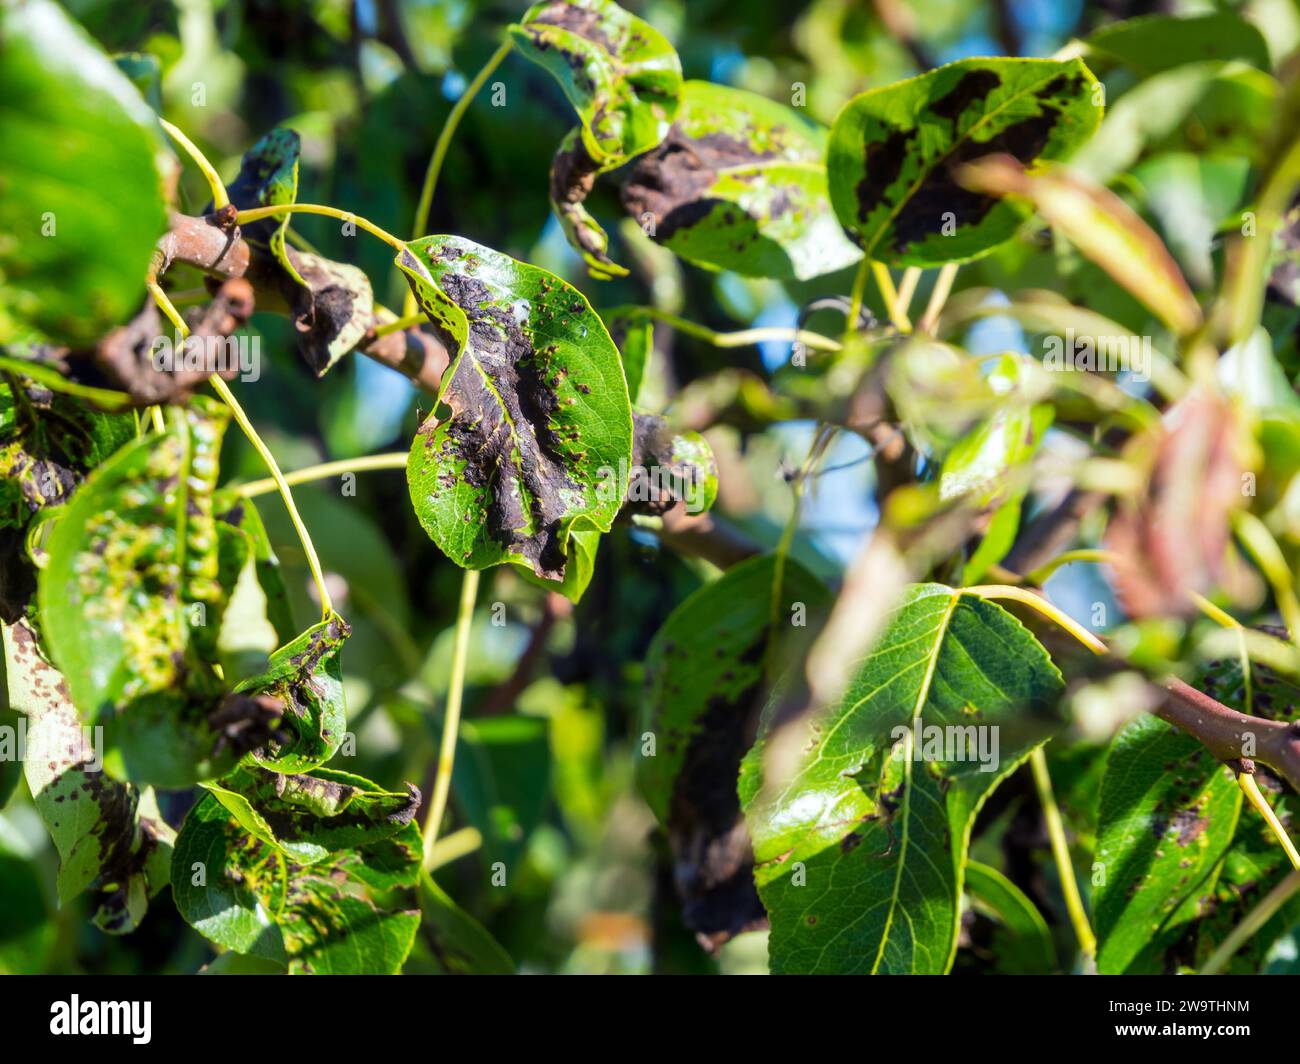 Blackened and deformed leaves of a young pear Stock Photo